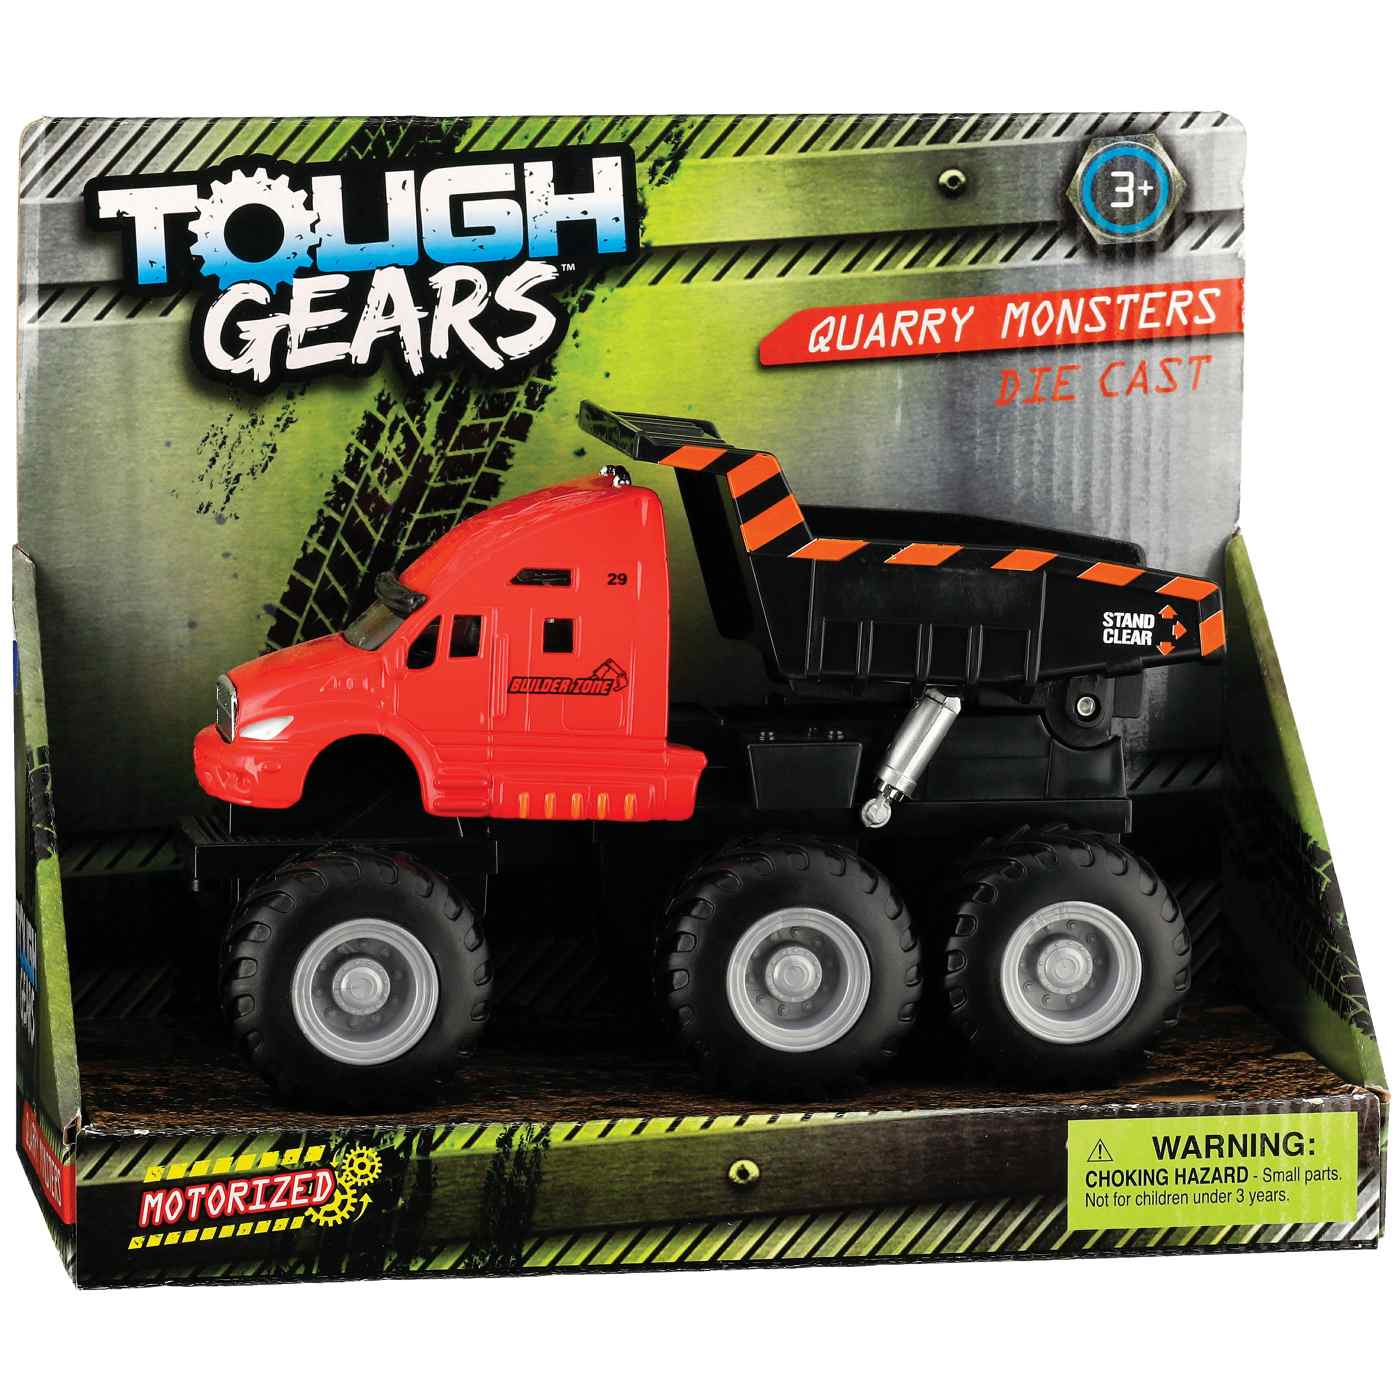 Tough Gears Quarry Monsters Die Cast Motorized Truck; image 1 of 2